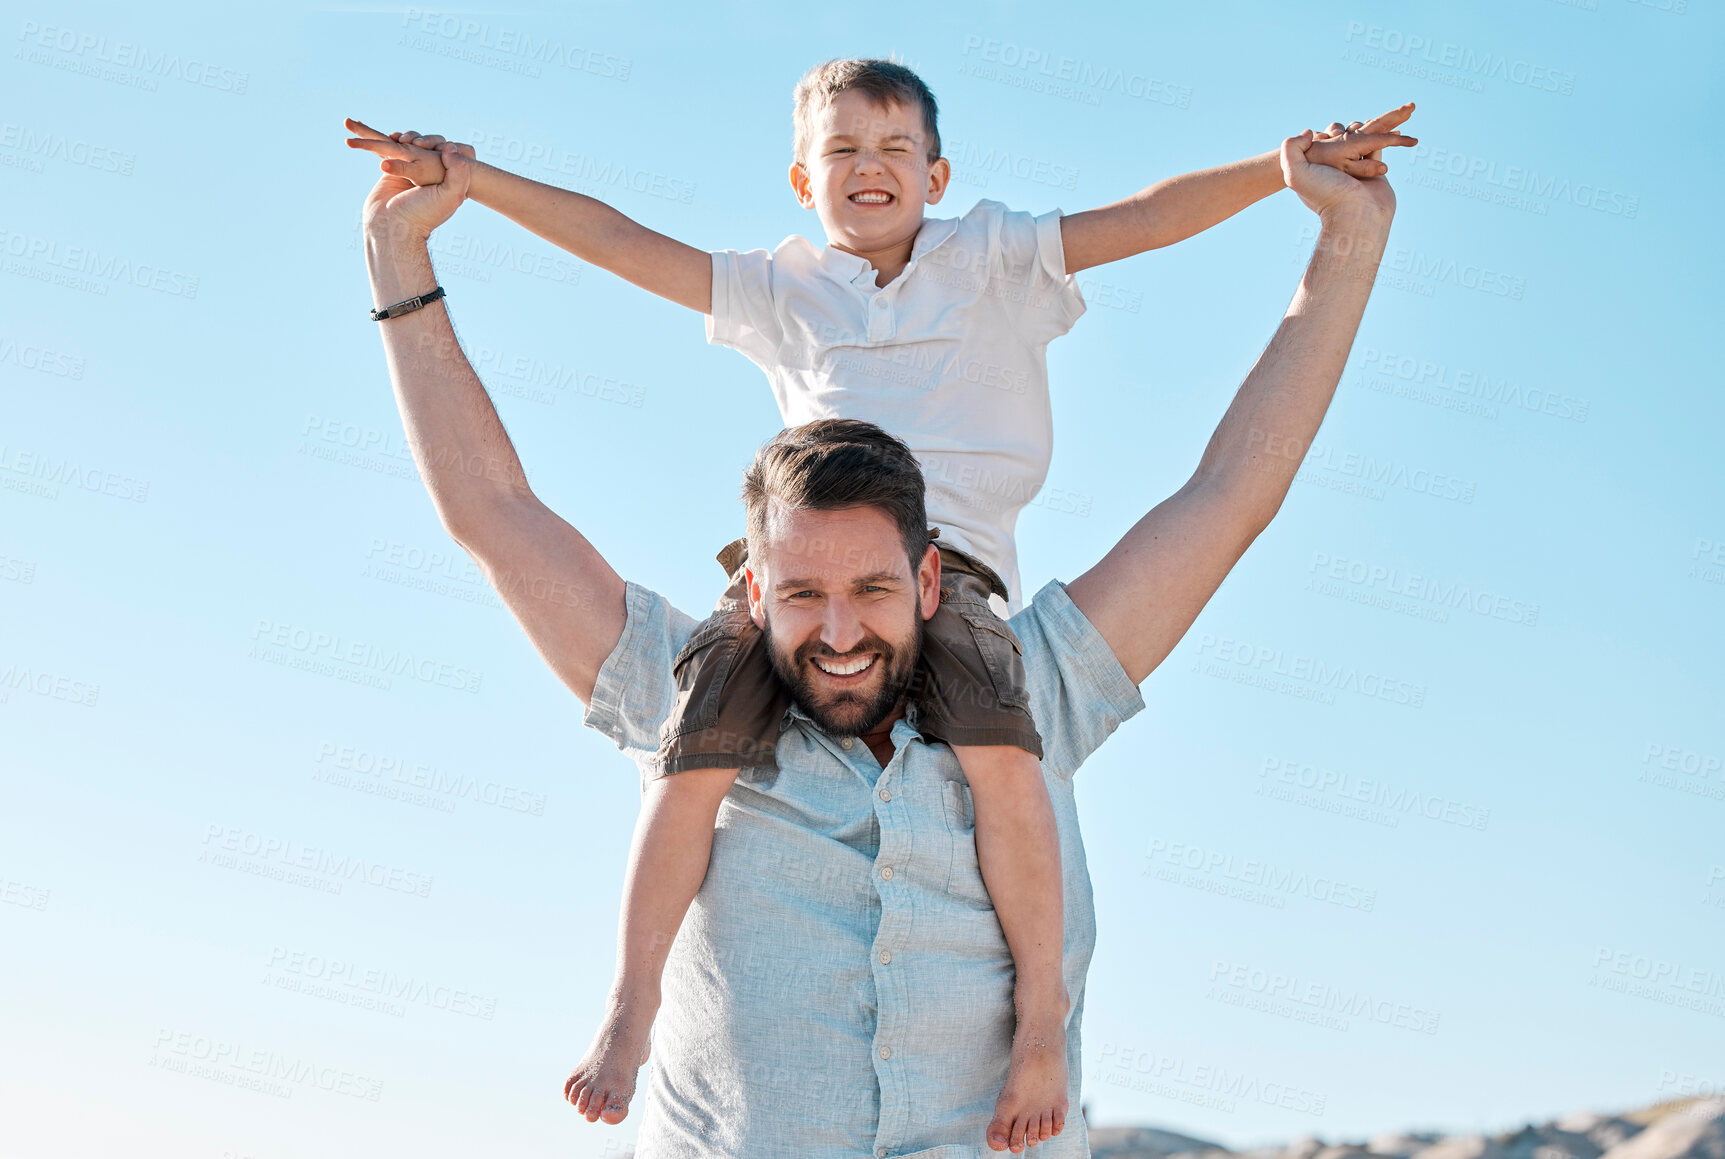 Buy stock photo Portrait of happy caucasian father and playful son having fun in the sun against blue sky outside. Carefree man carrying excited boy on shoulders piggyback ride and pretending to fly with arms out